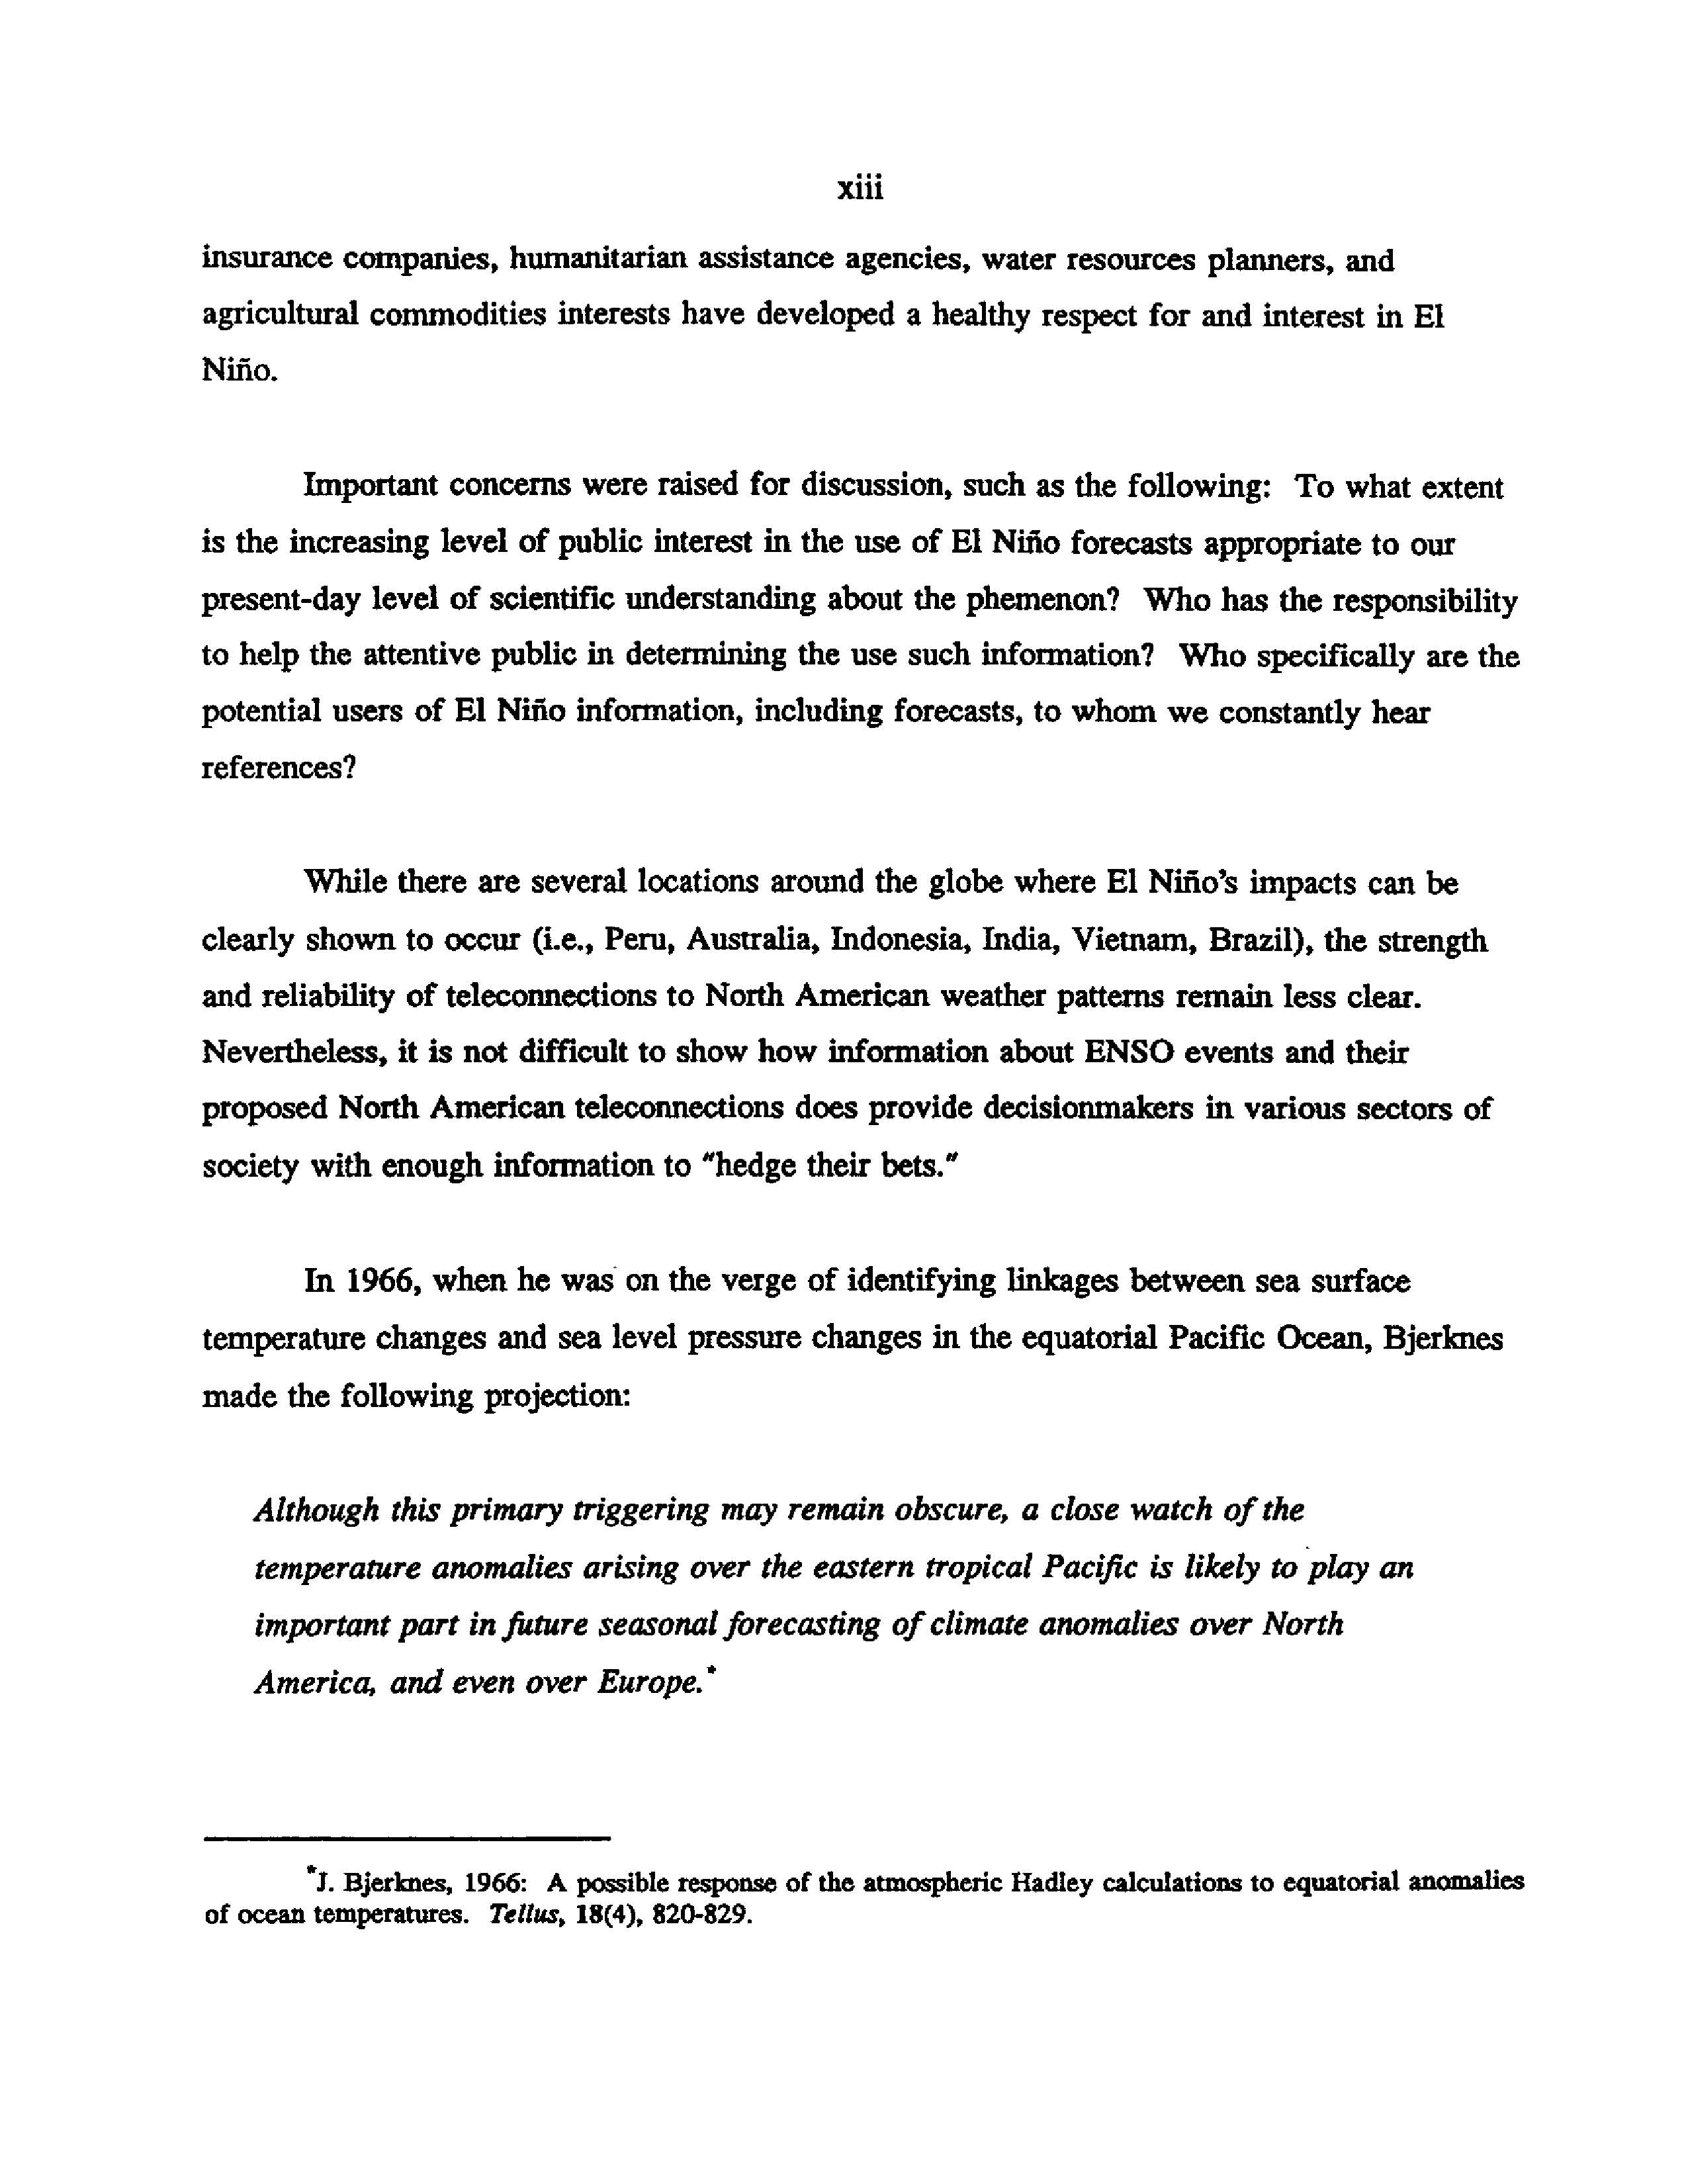 The Potential Use and Misuse of El Nino Information 1994_Page_6